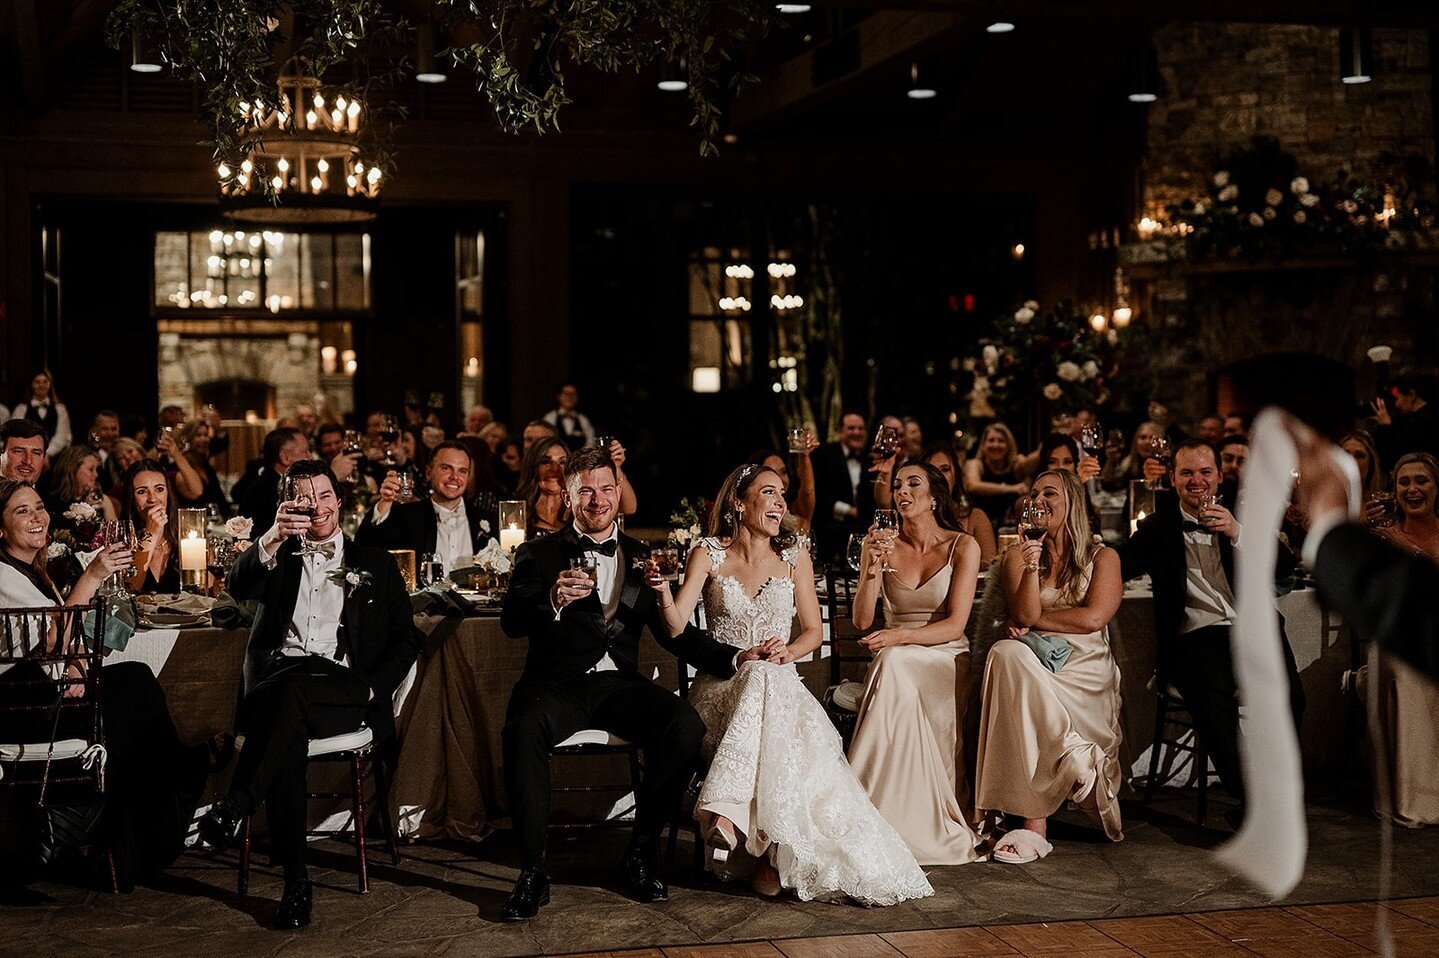 Is there truly a better feeling than gathering with the people you love the most in this world?⁠
⁠
Cheers to you and your magical day!⁠
⁠
Vendor team: ⁠
⁠
Videographer: @authenticcollectivefilms 
Photographer: @authenticcollectivephoto⁠
Planner: @wet